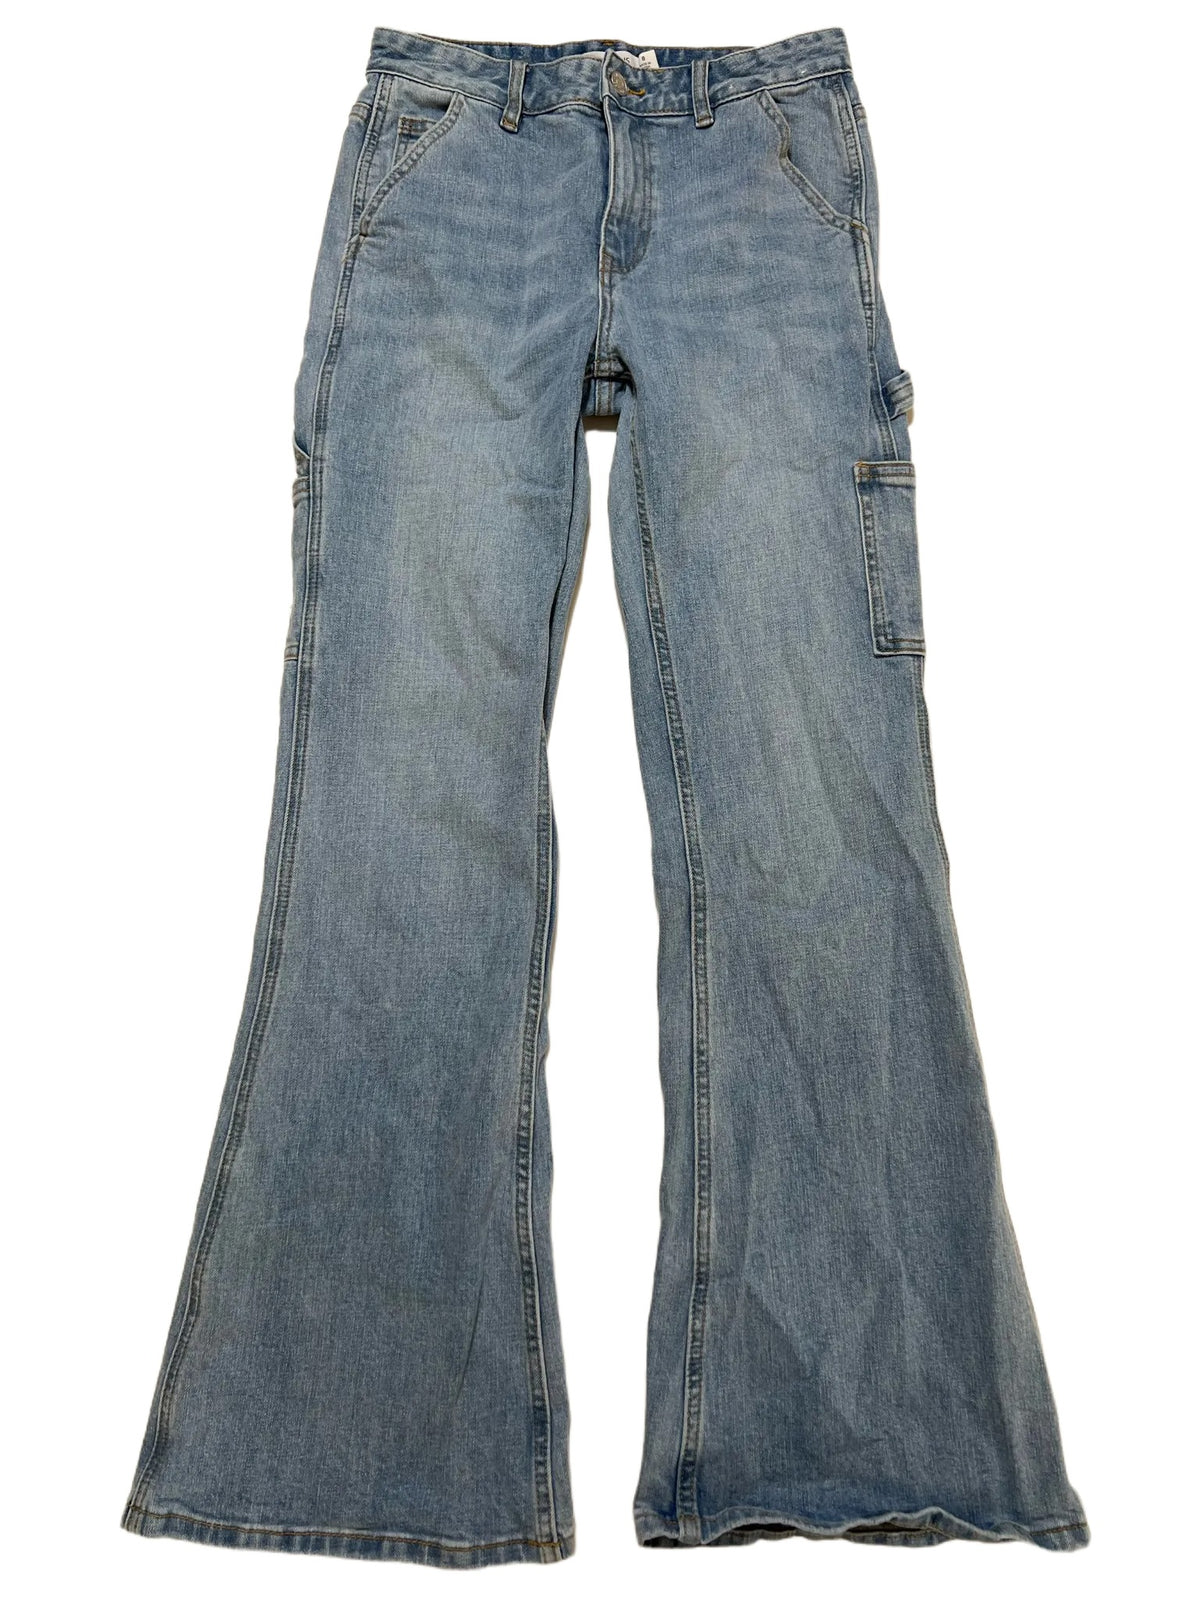 Glassons- Light Wash Flare Jeans